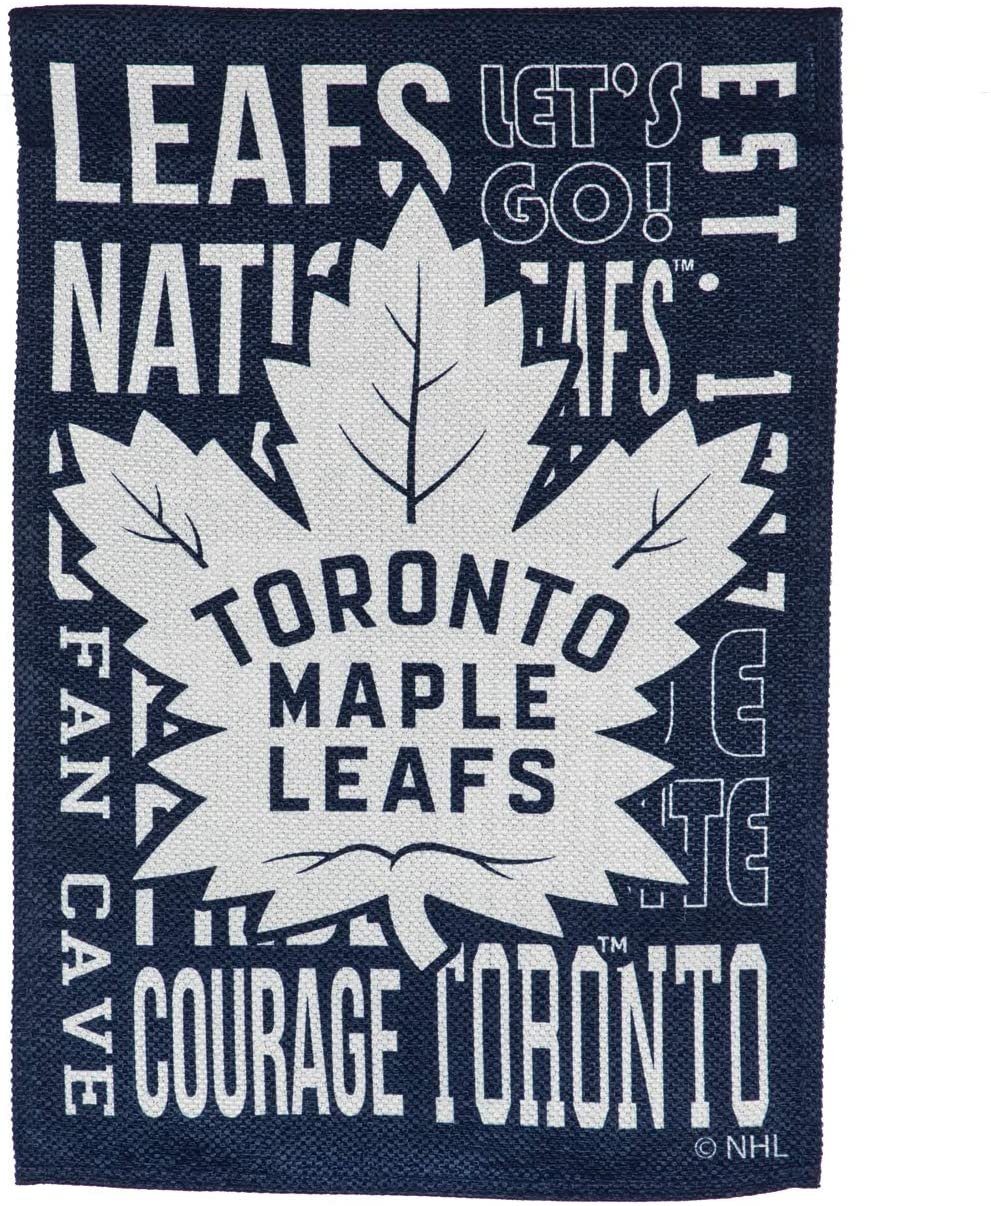 Toronto Maple Leafs Premium Garden Flag Banner, Double Sided, Fan Rules Style, 13x18 Inch